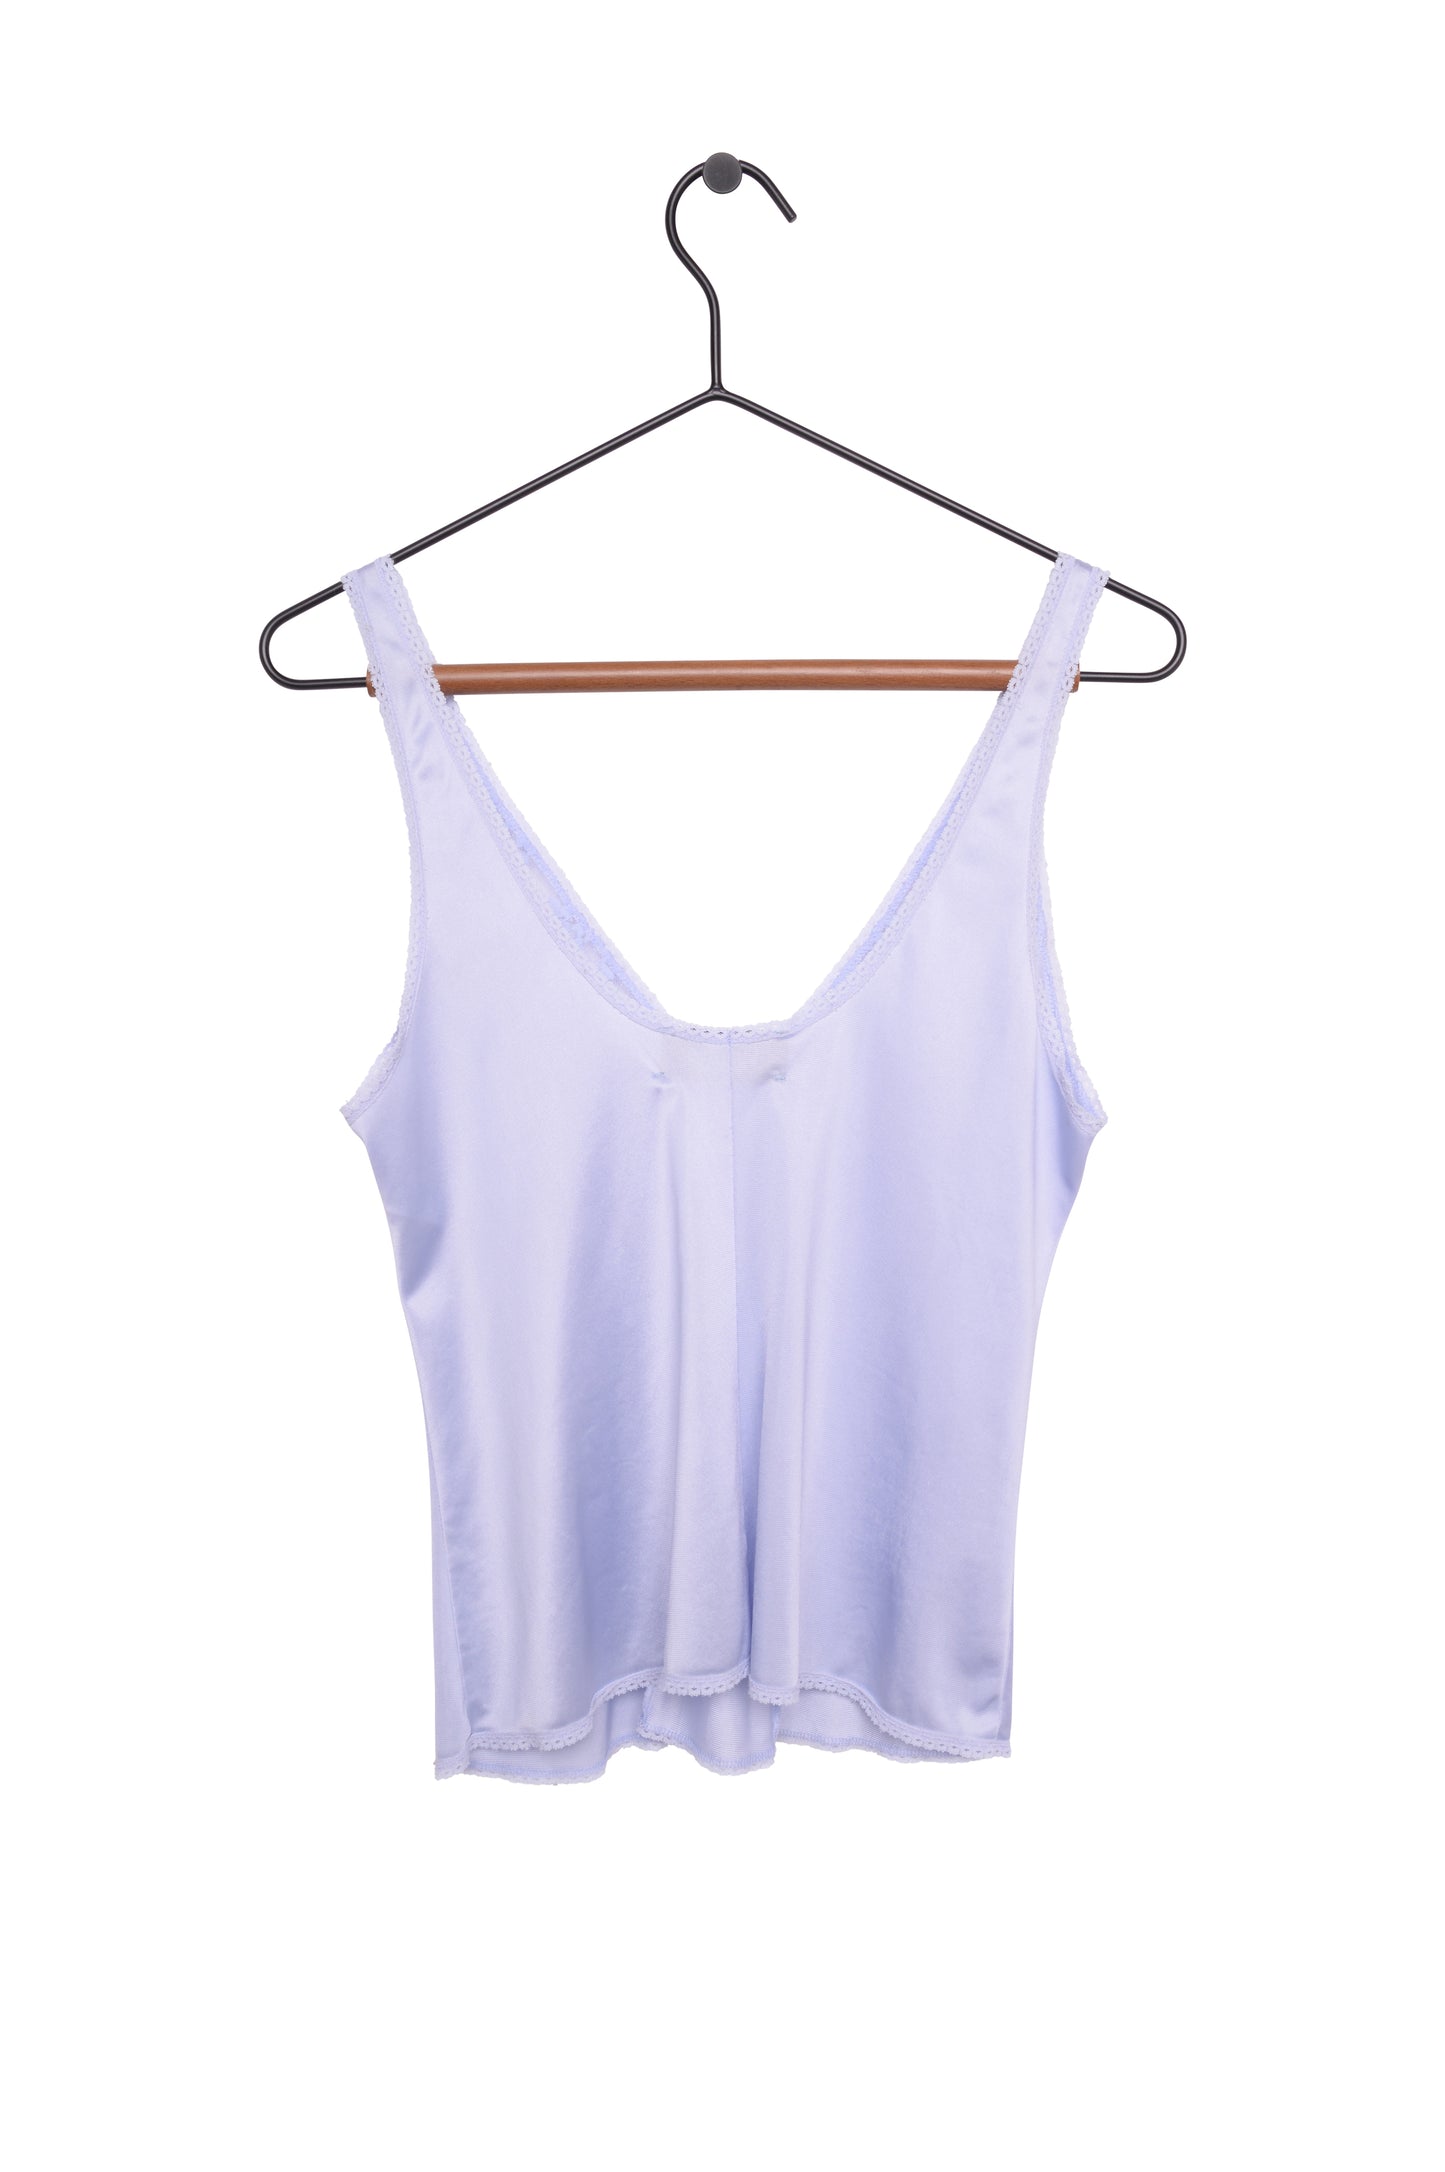 Hand-Dyed Lace Slip Top USA